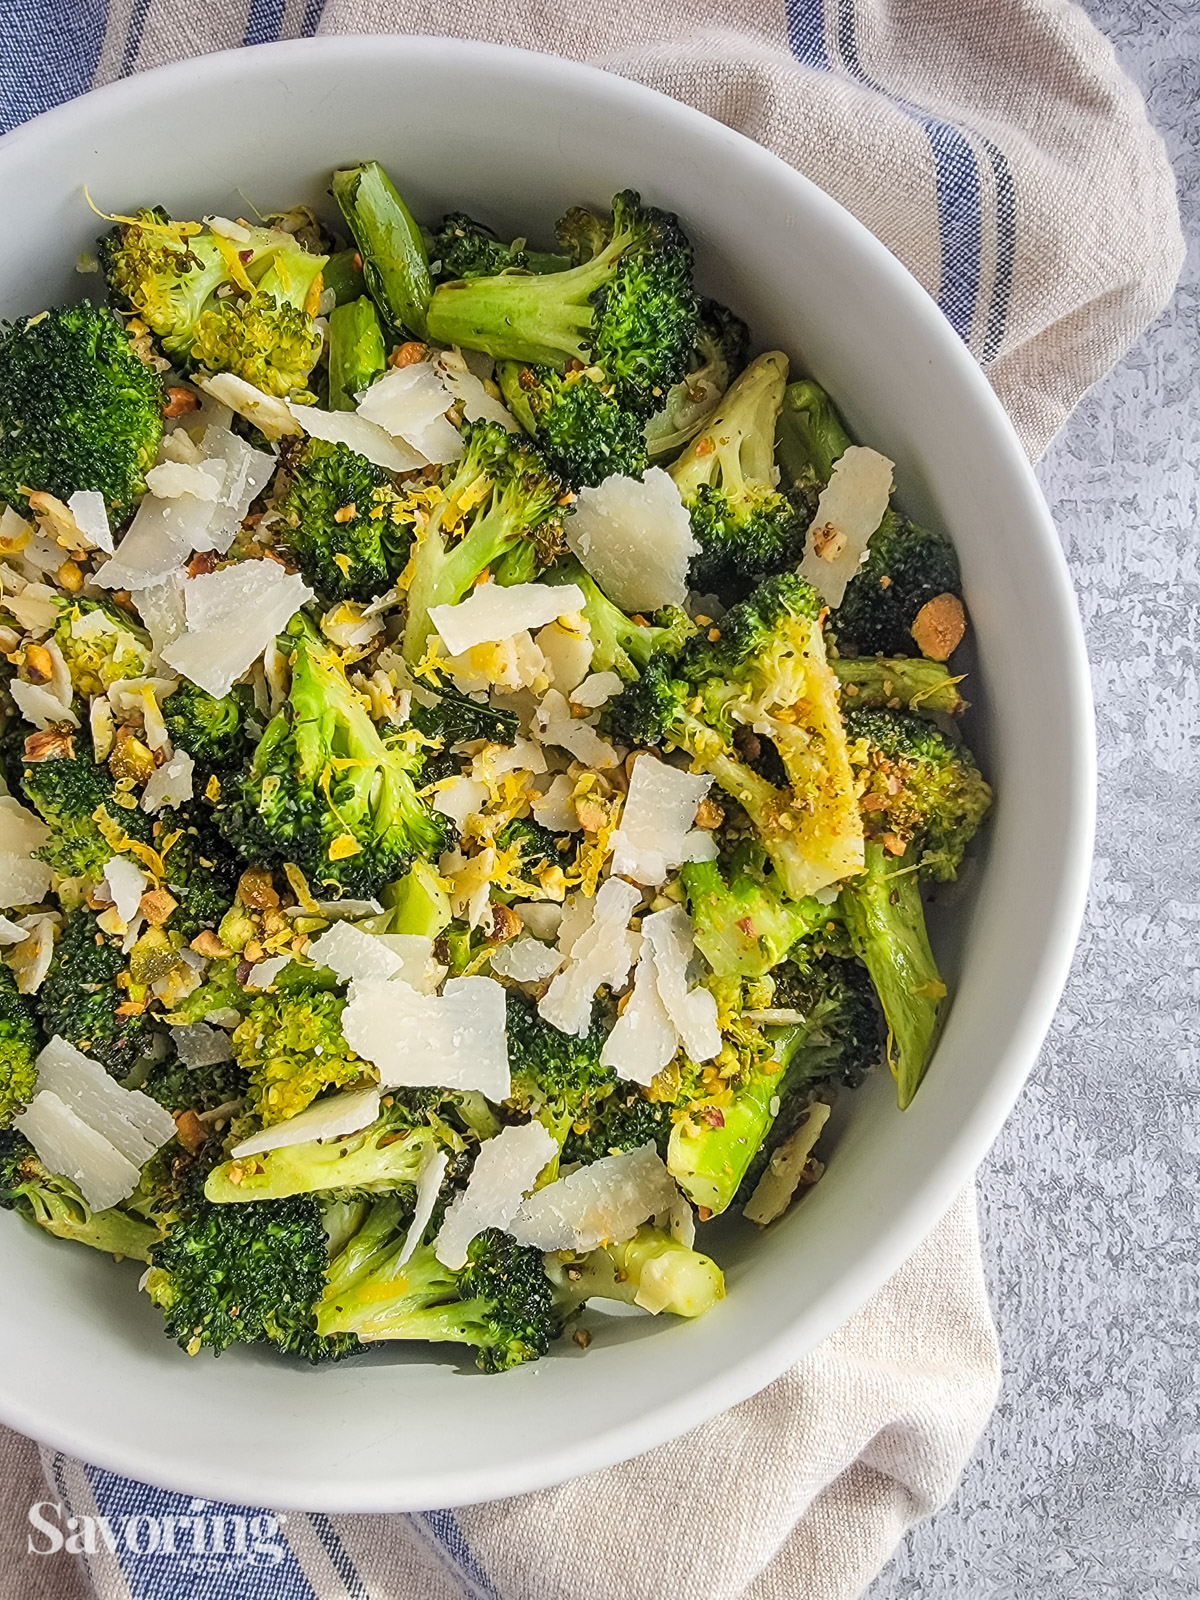 roasted broccoli with shaved parmesan, lemon zest, and pistachios in a white bowl set over a towel